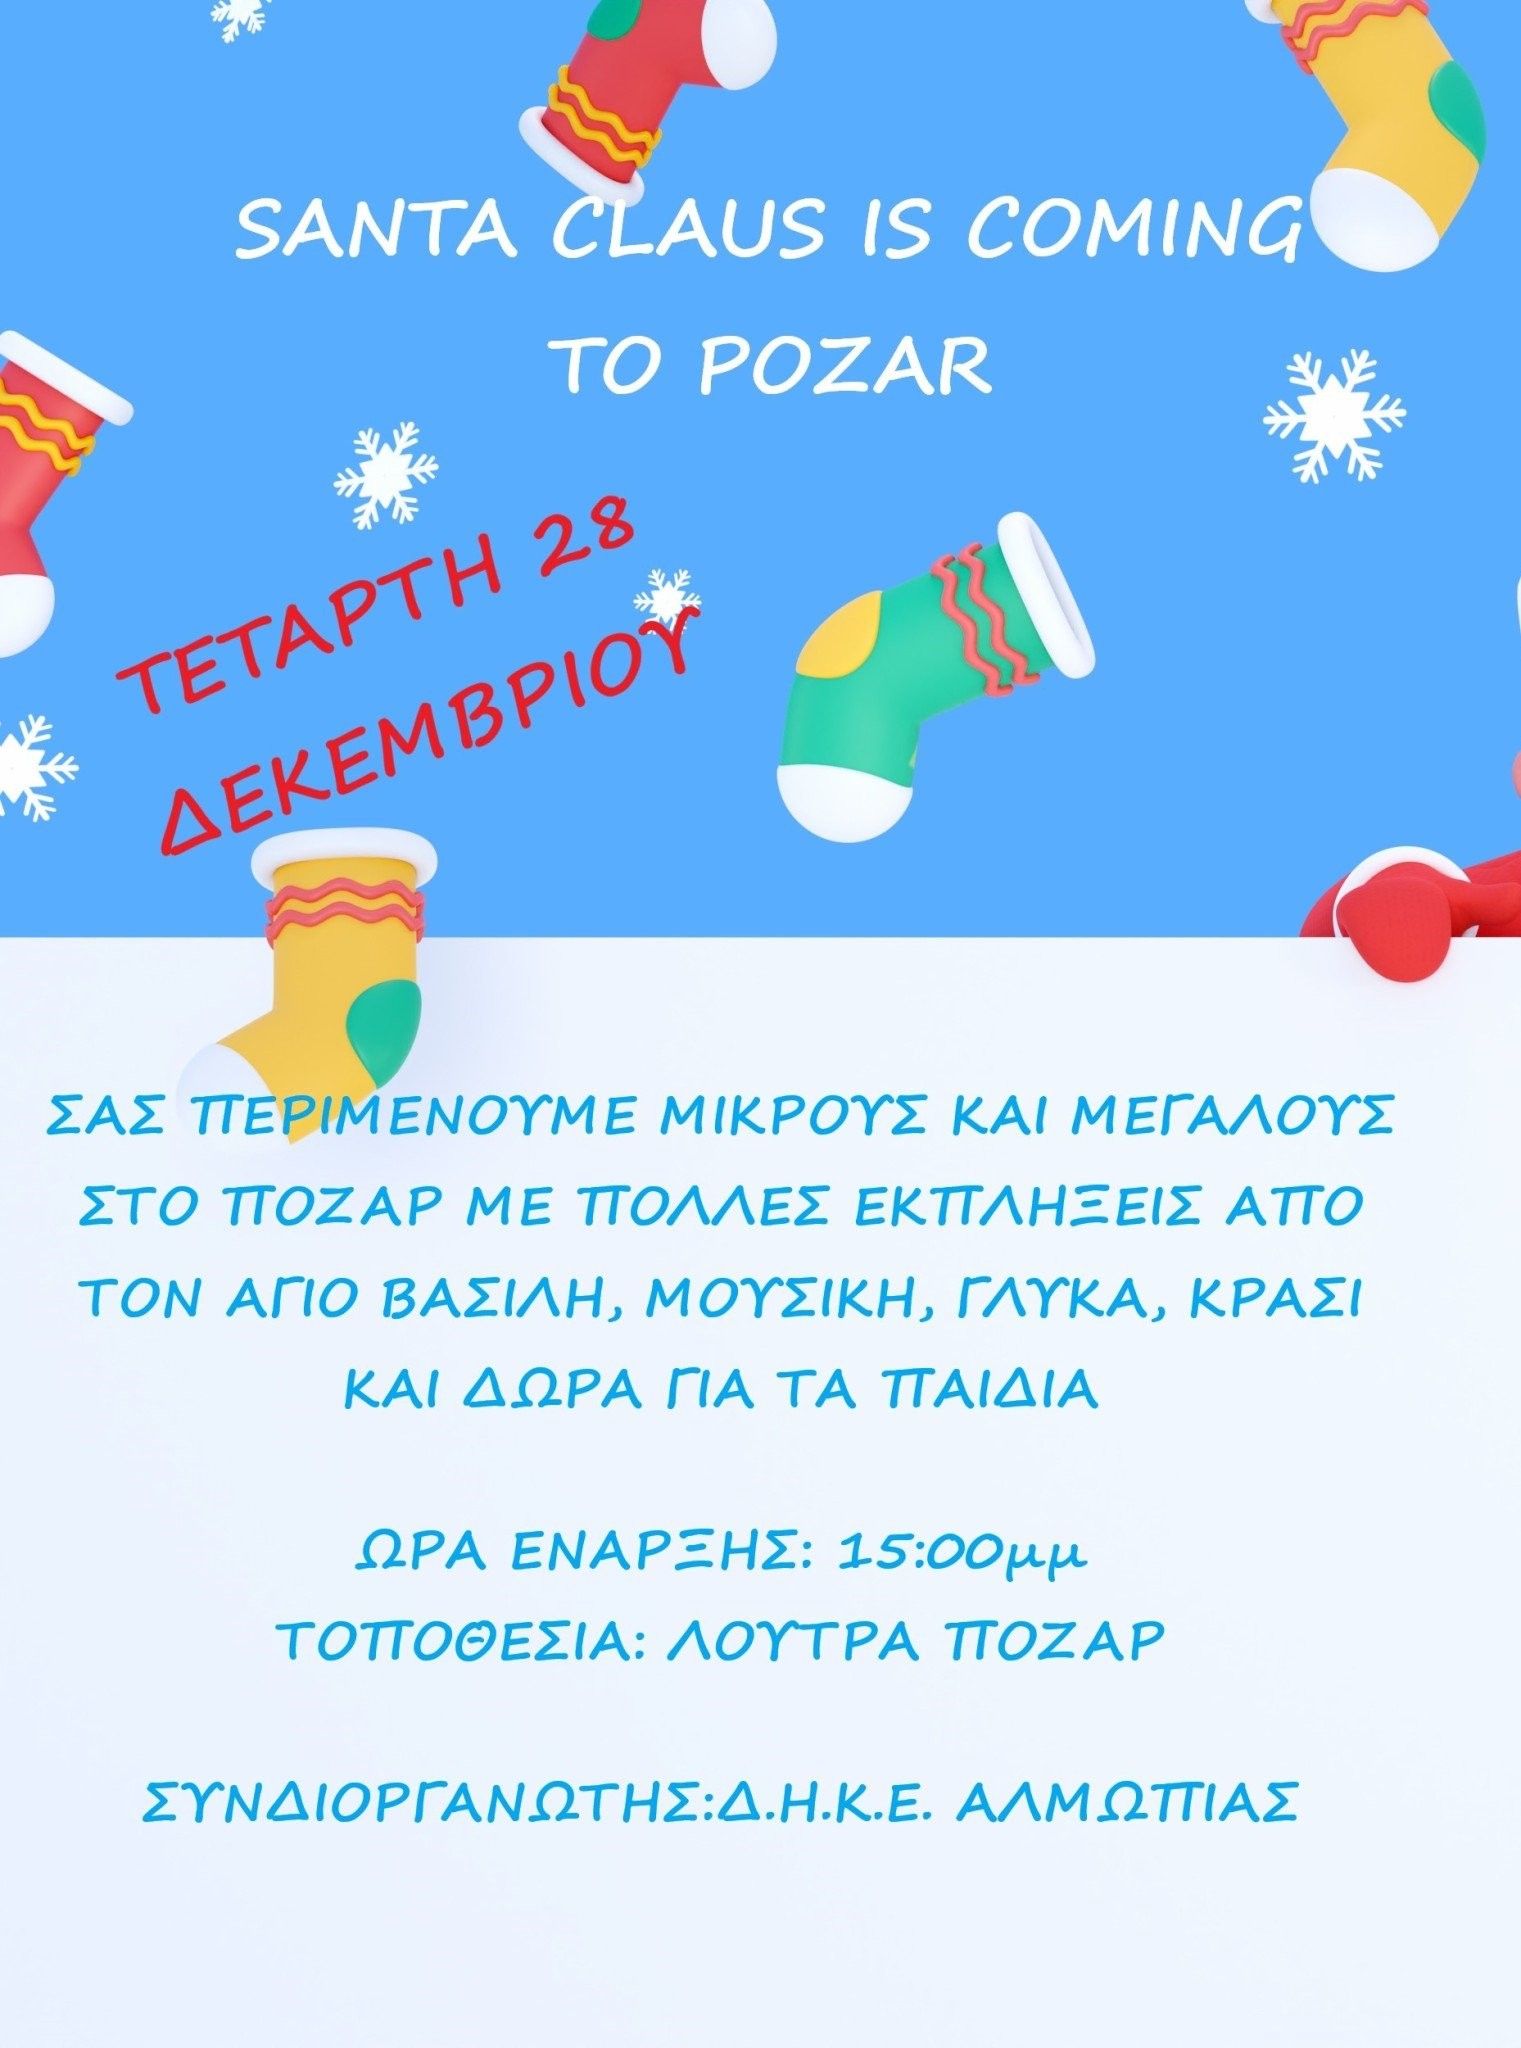 santa-claus-is-coming-to-pozar-f.jpg